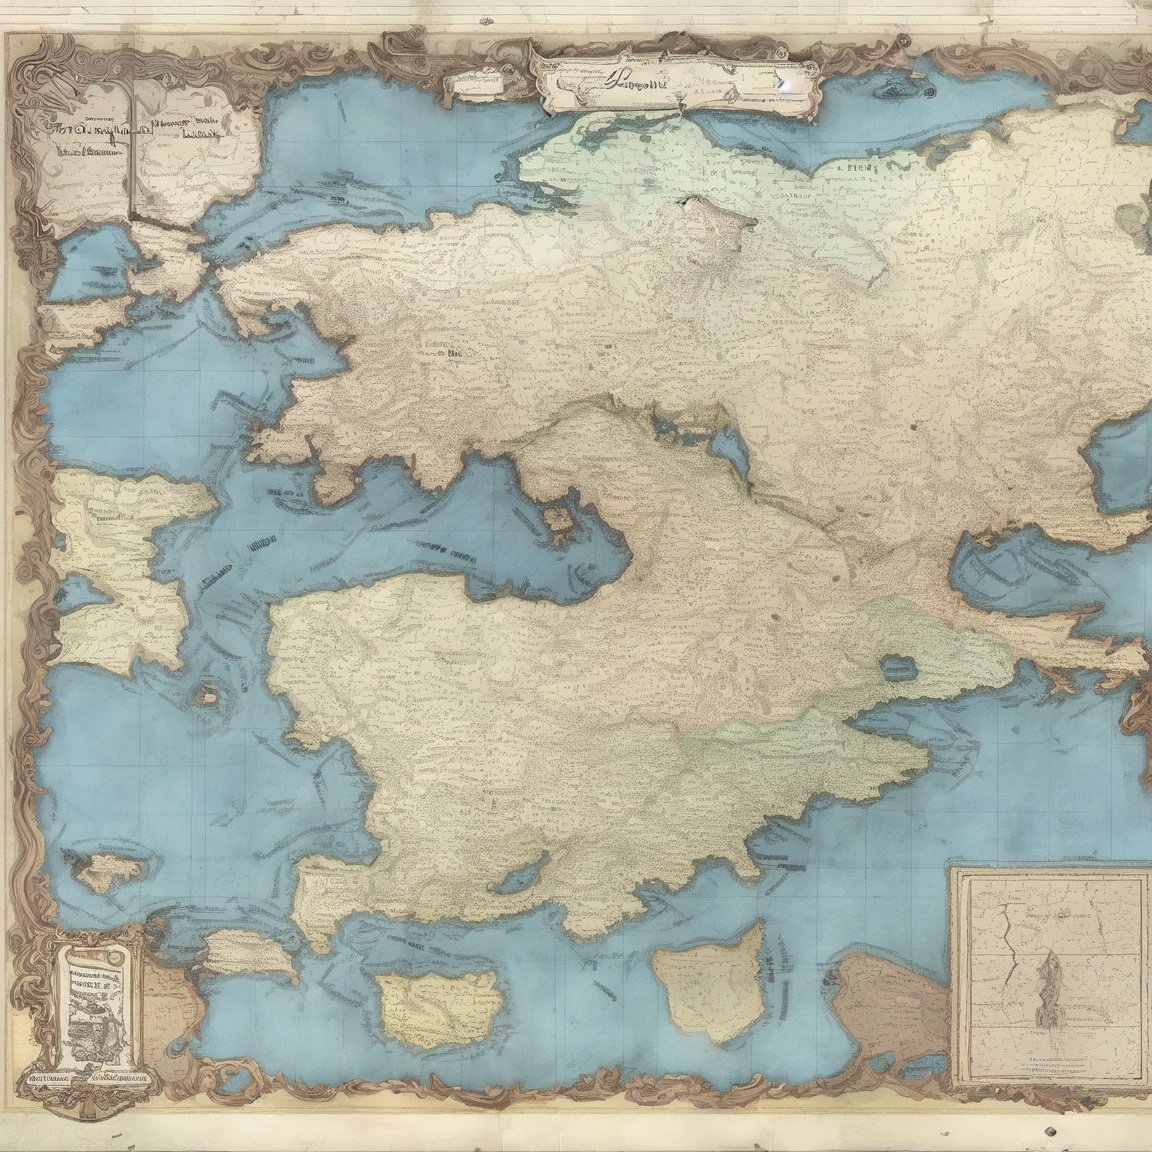 Image of old fictional map